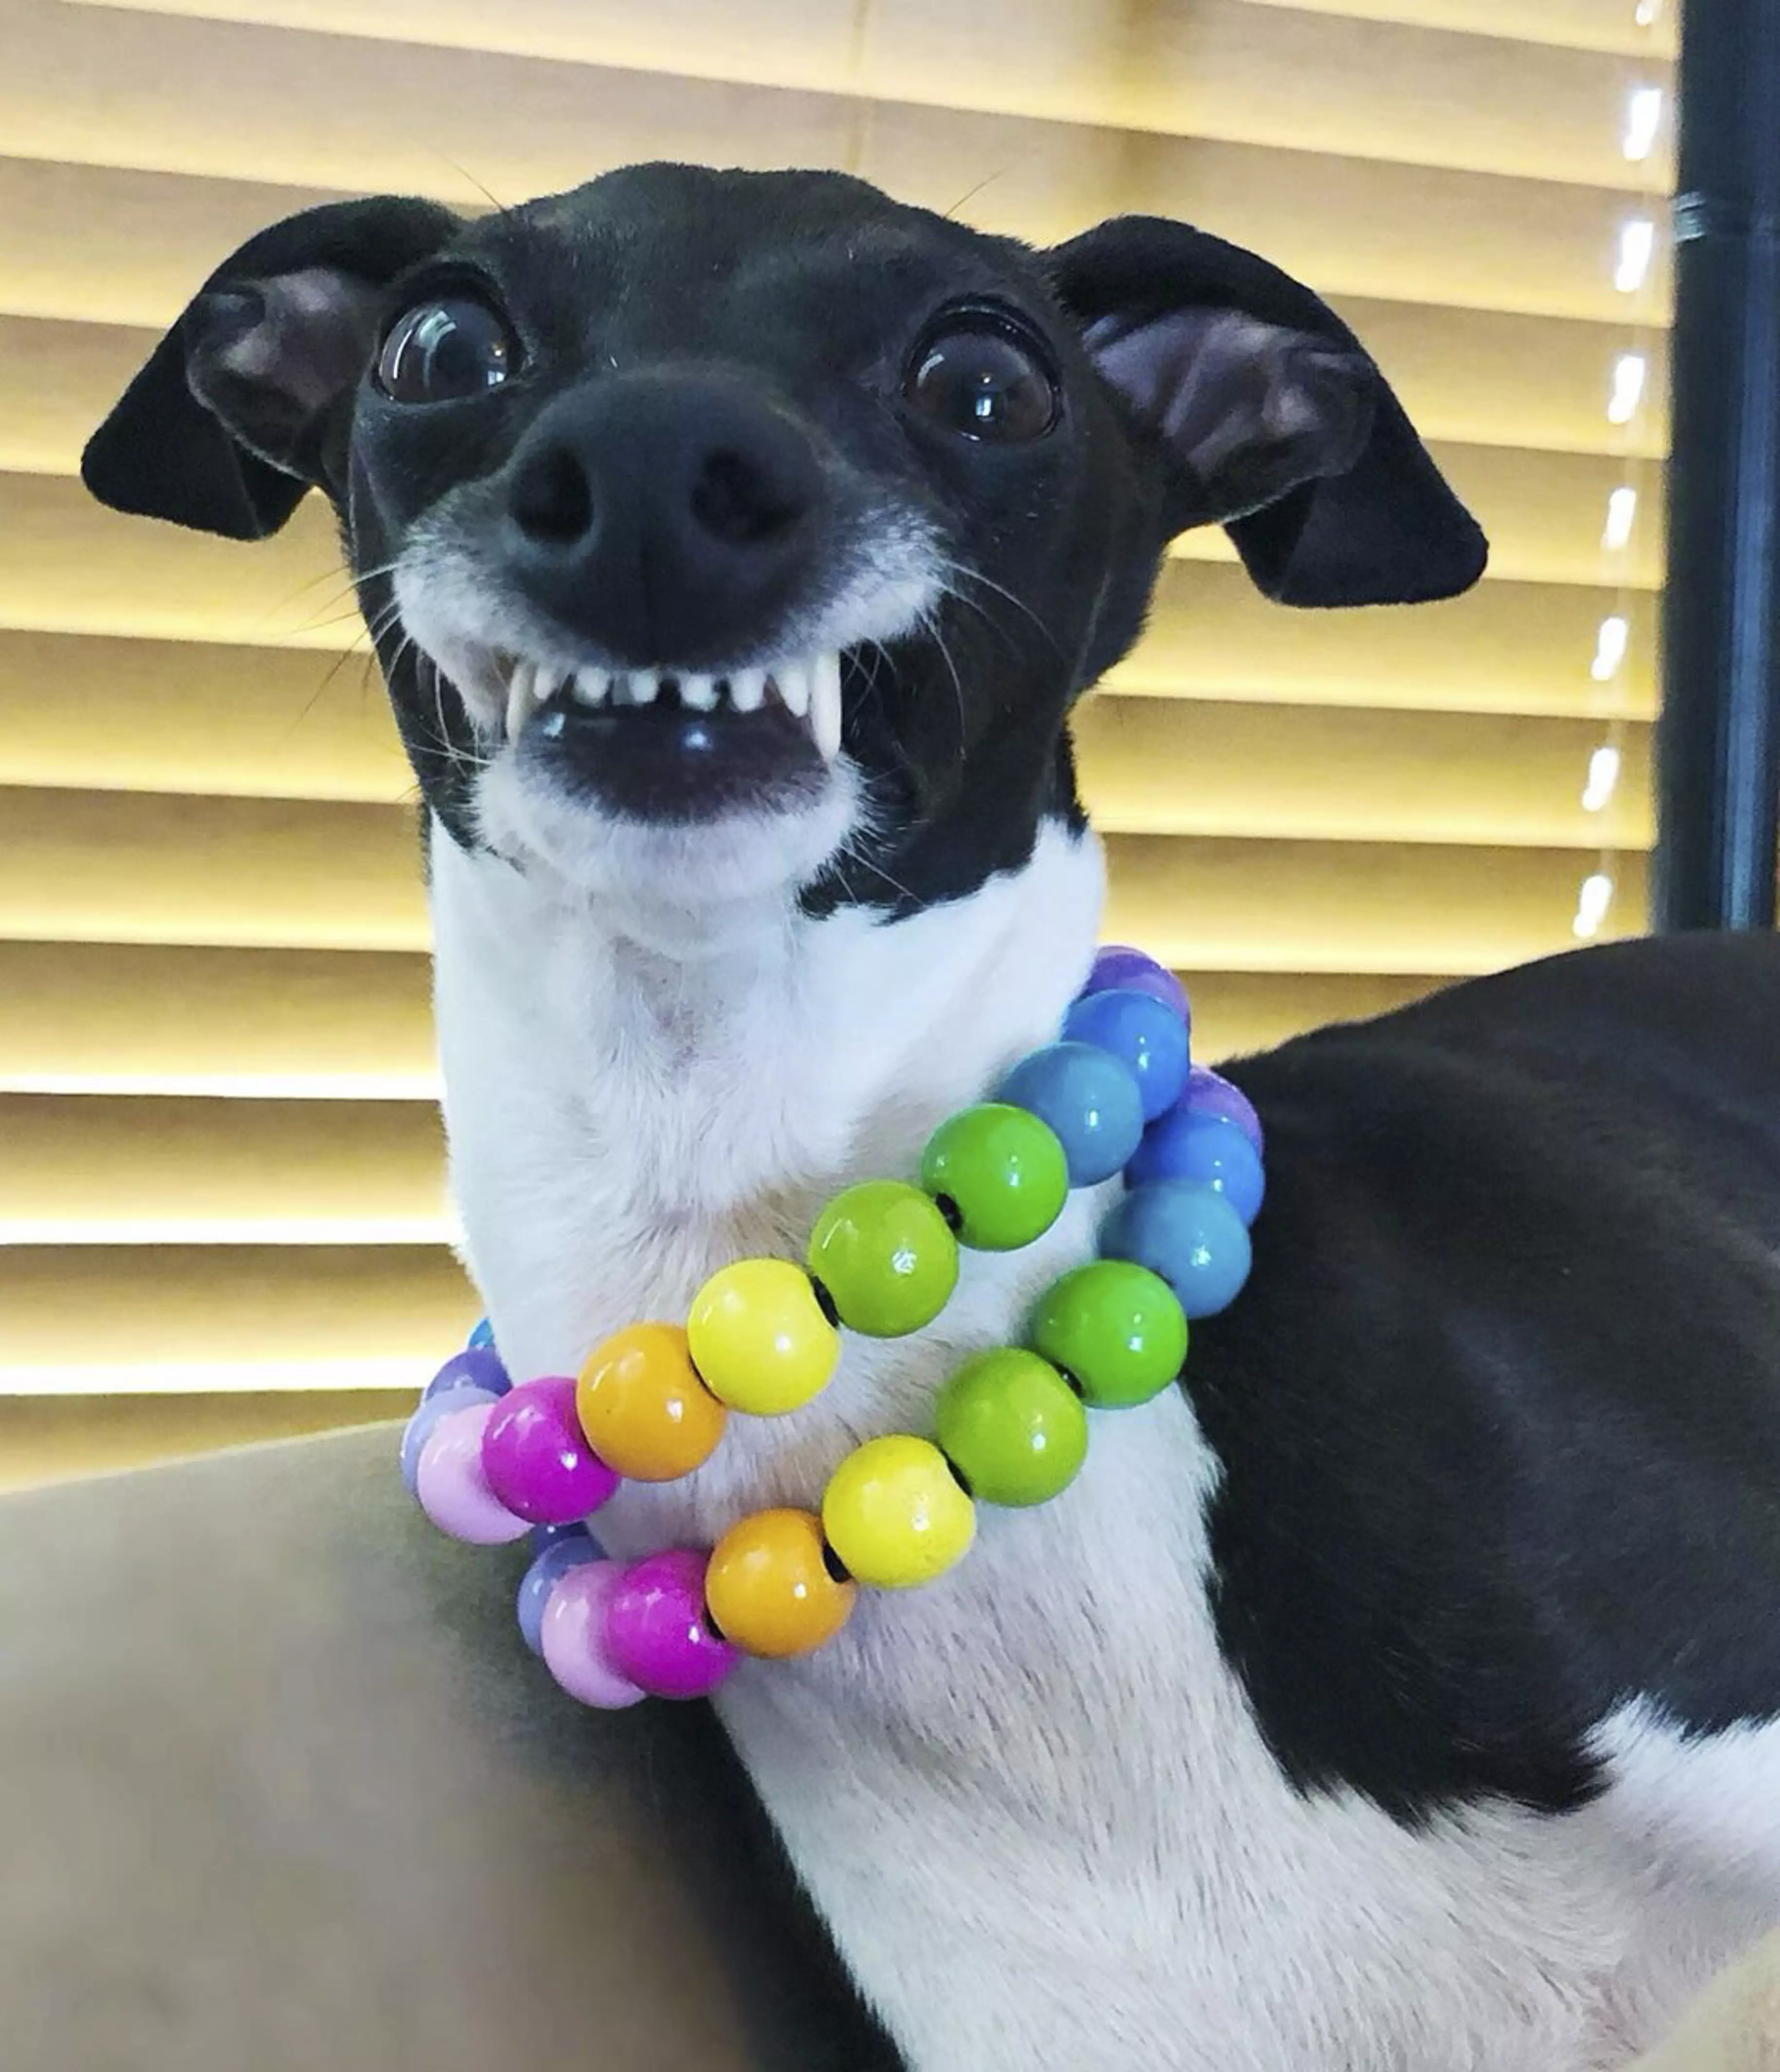 Her owner began sharing photos of her unique smile in 2018 (